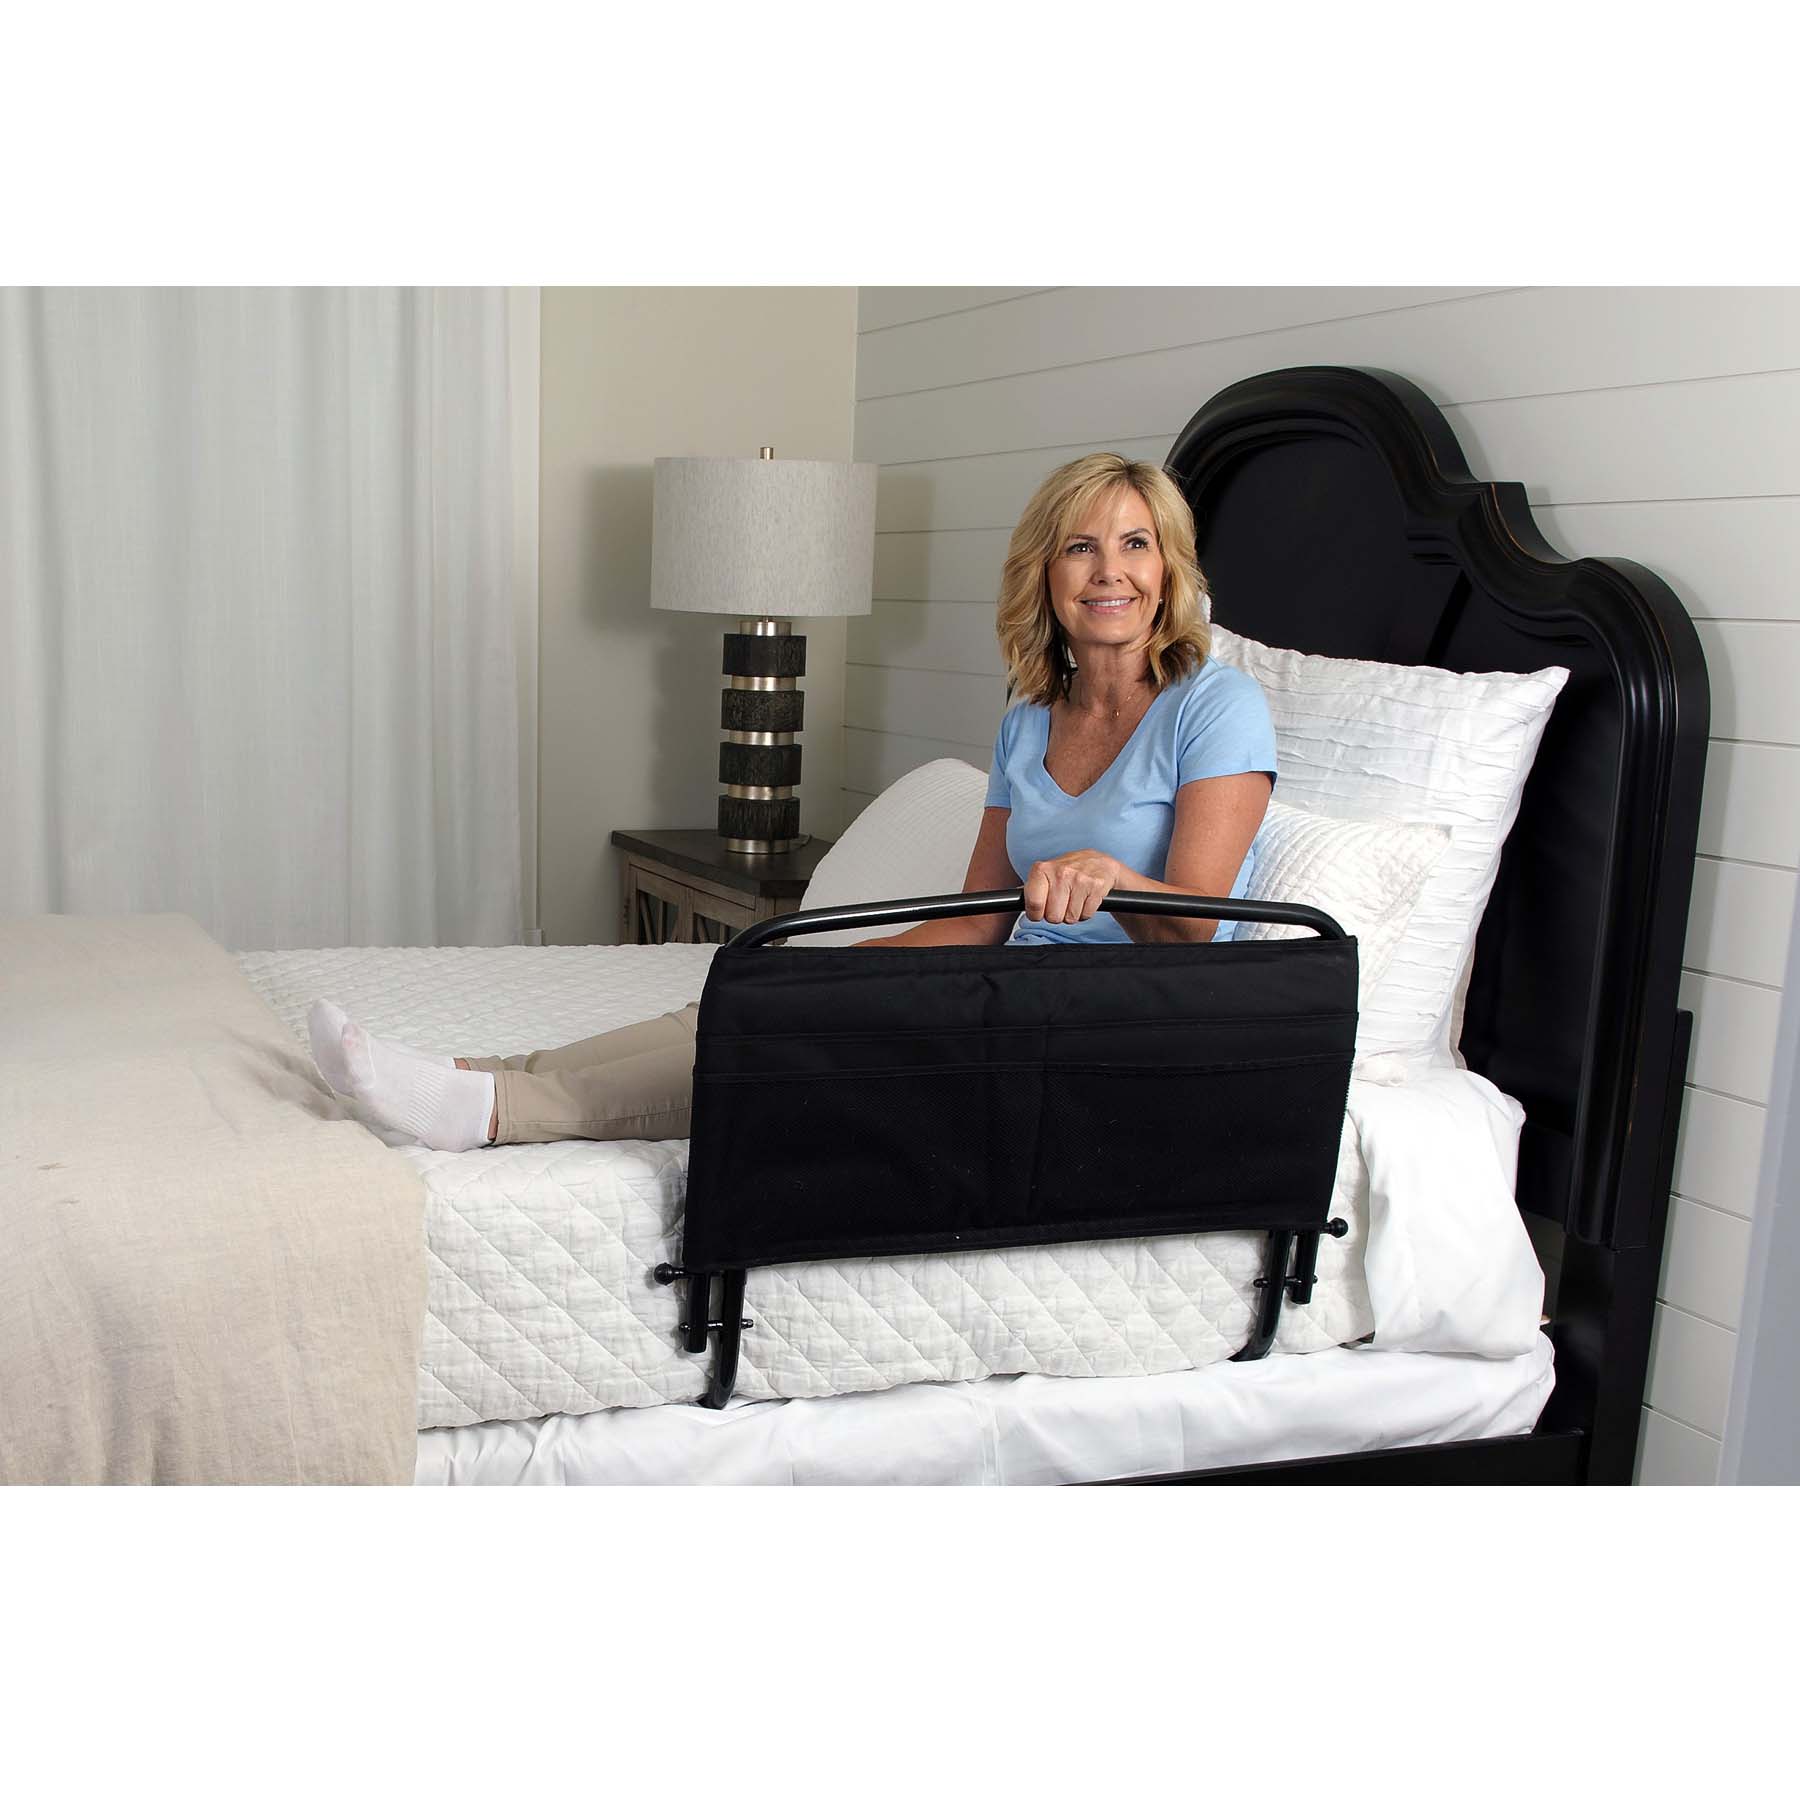 Stander 30” Safety Bed Rail & Padded Pouch